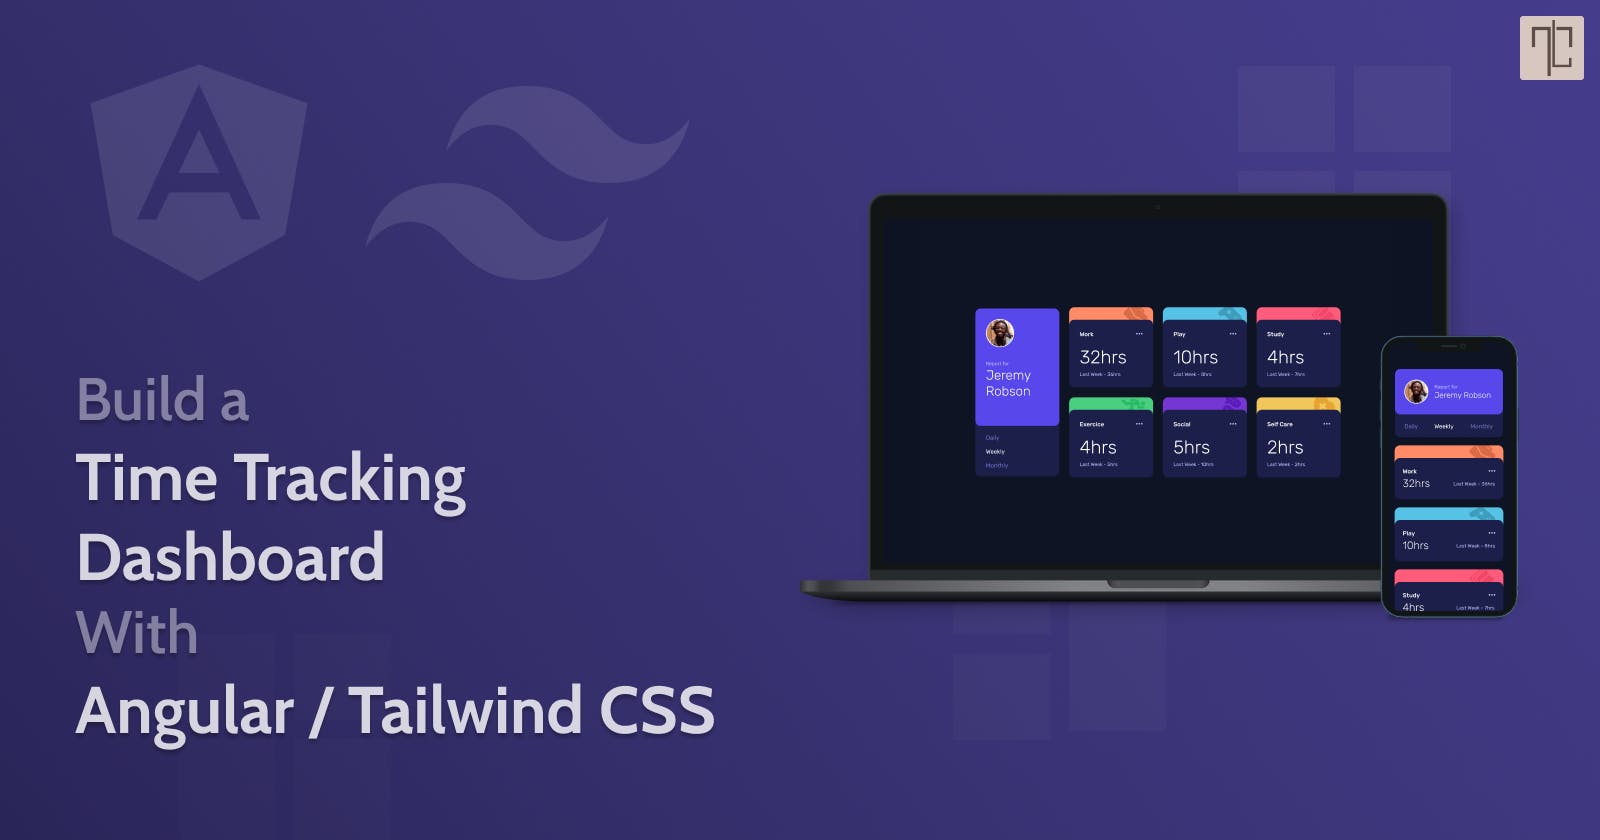 Build a Time Tracking Dashboard using Angular and Tailwind CSS